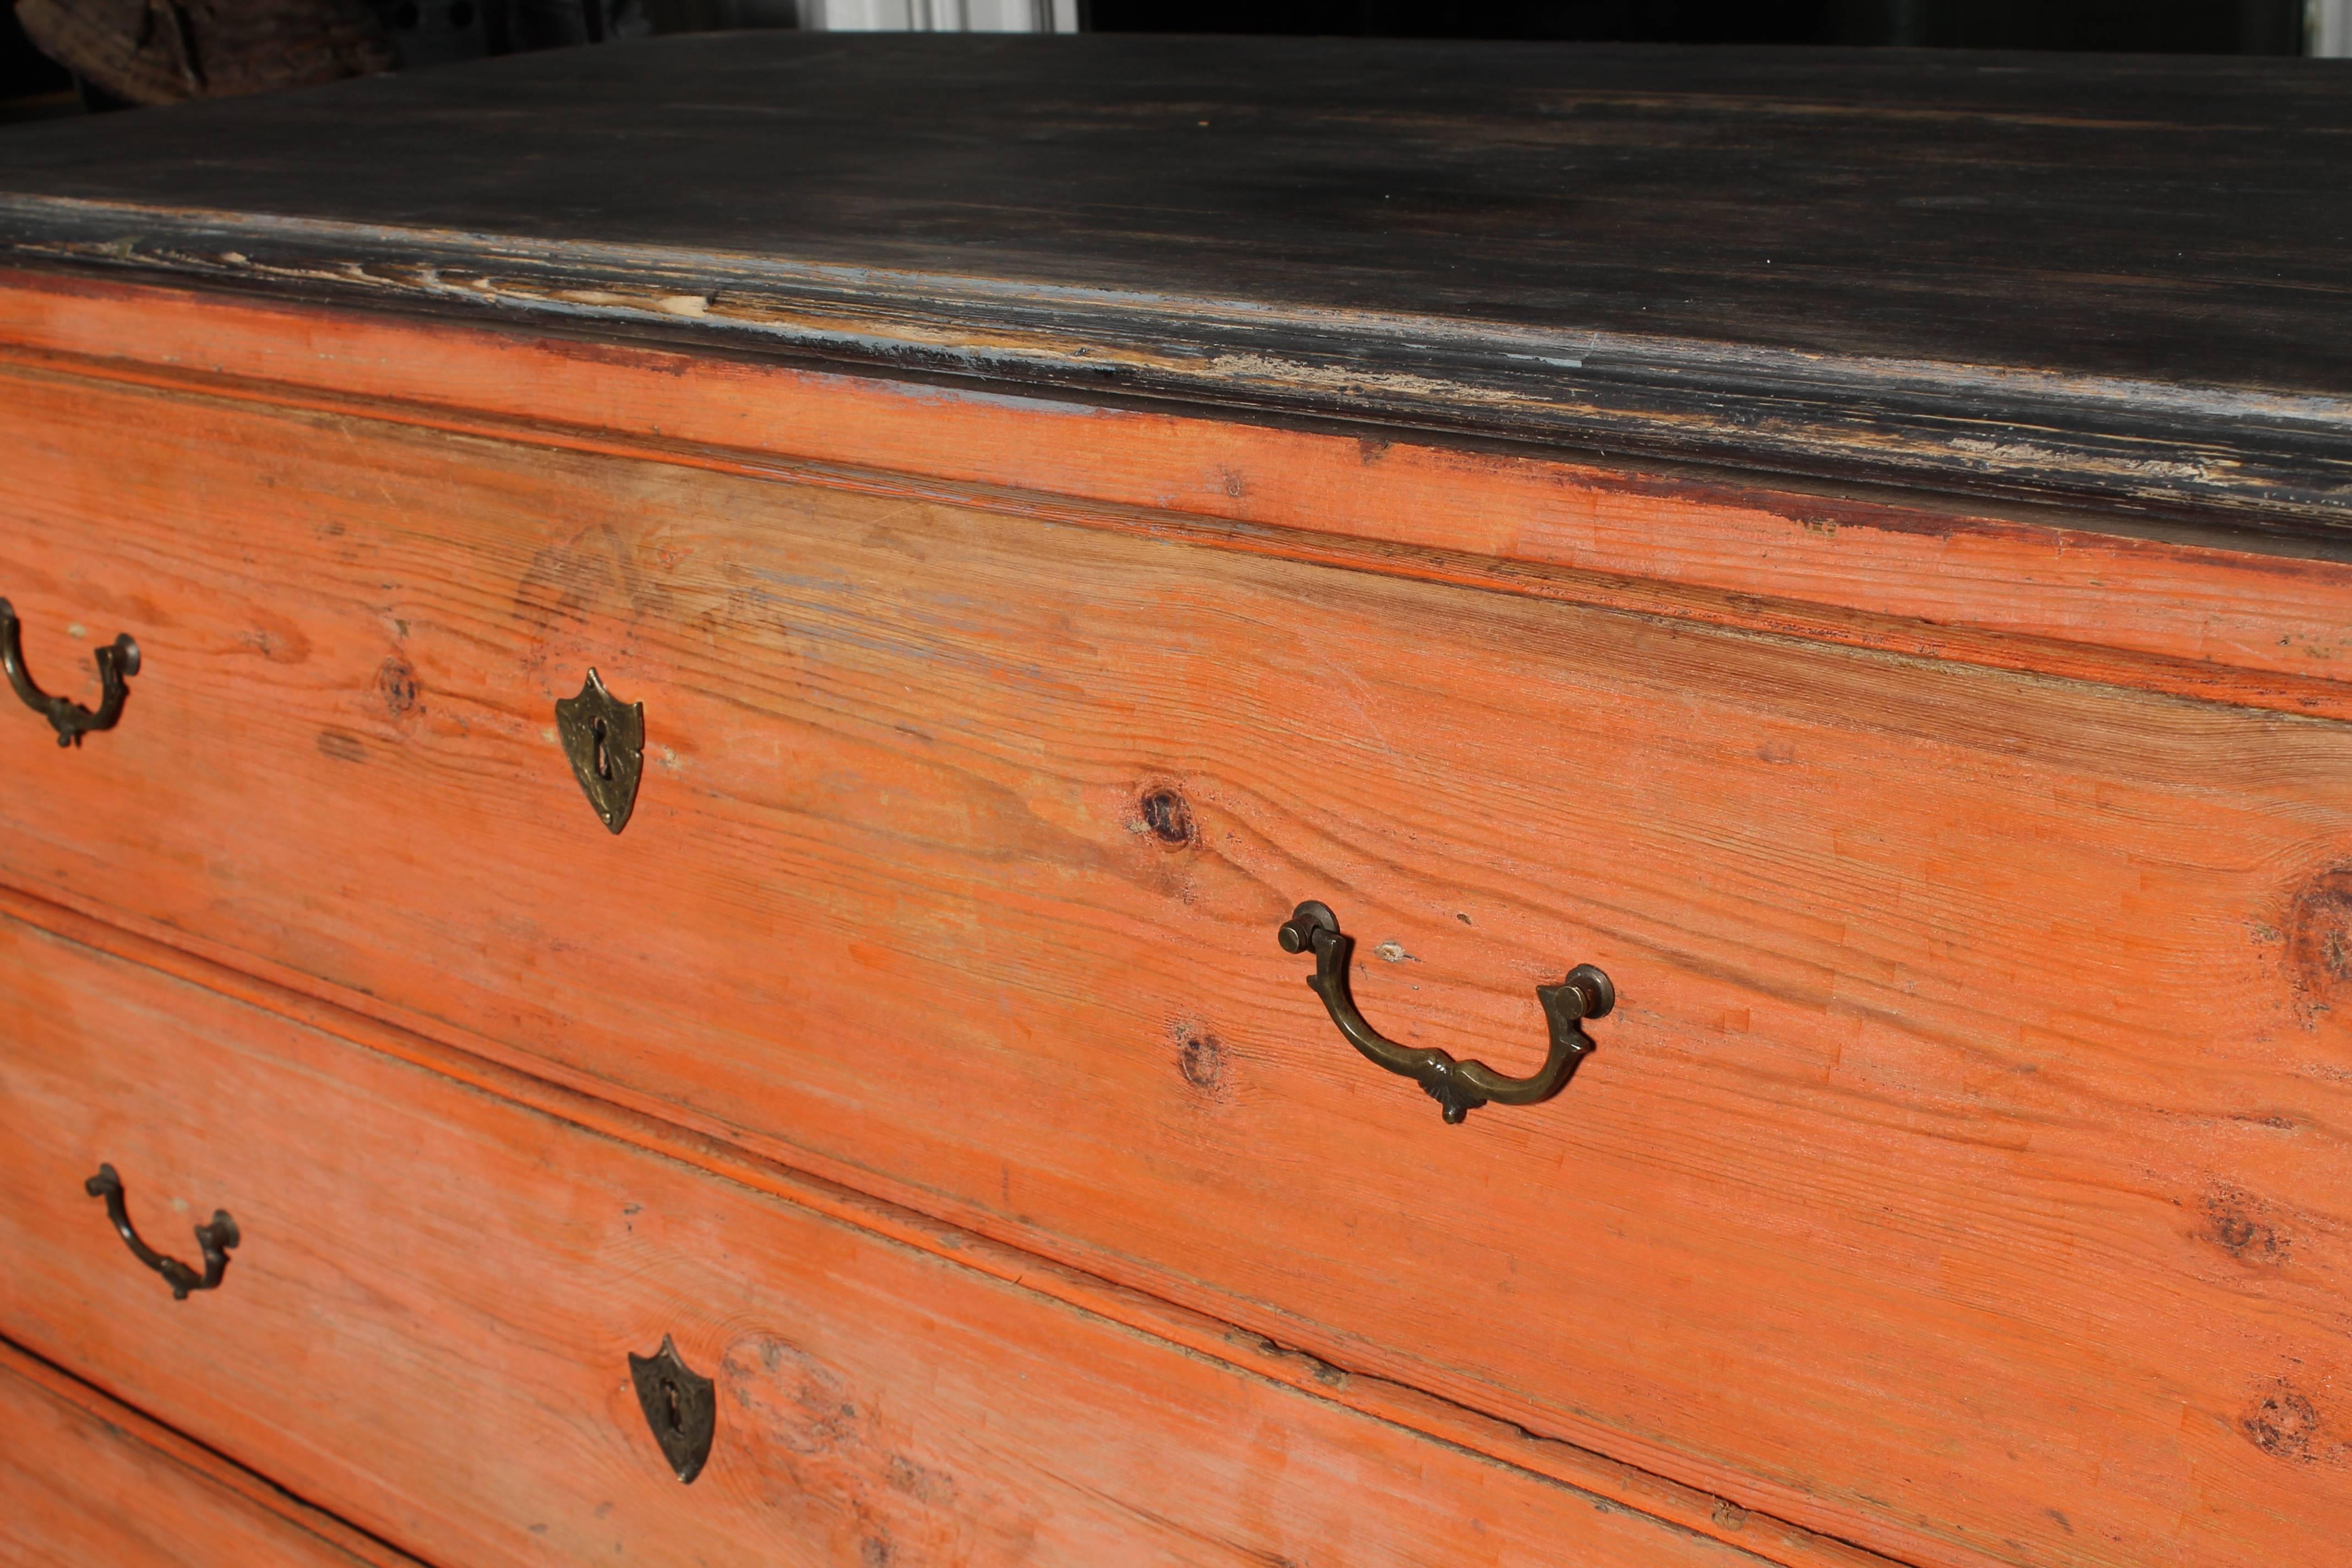 19th century Swedish chest of drawers, orange and black repainting, three drawers. Extraordinary painting which is typical for norhtern part of Sweden. 